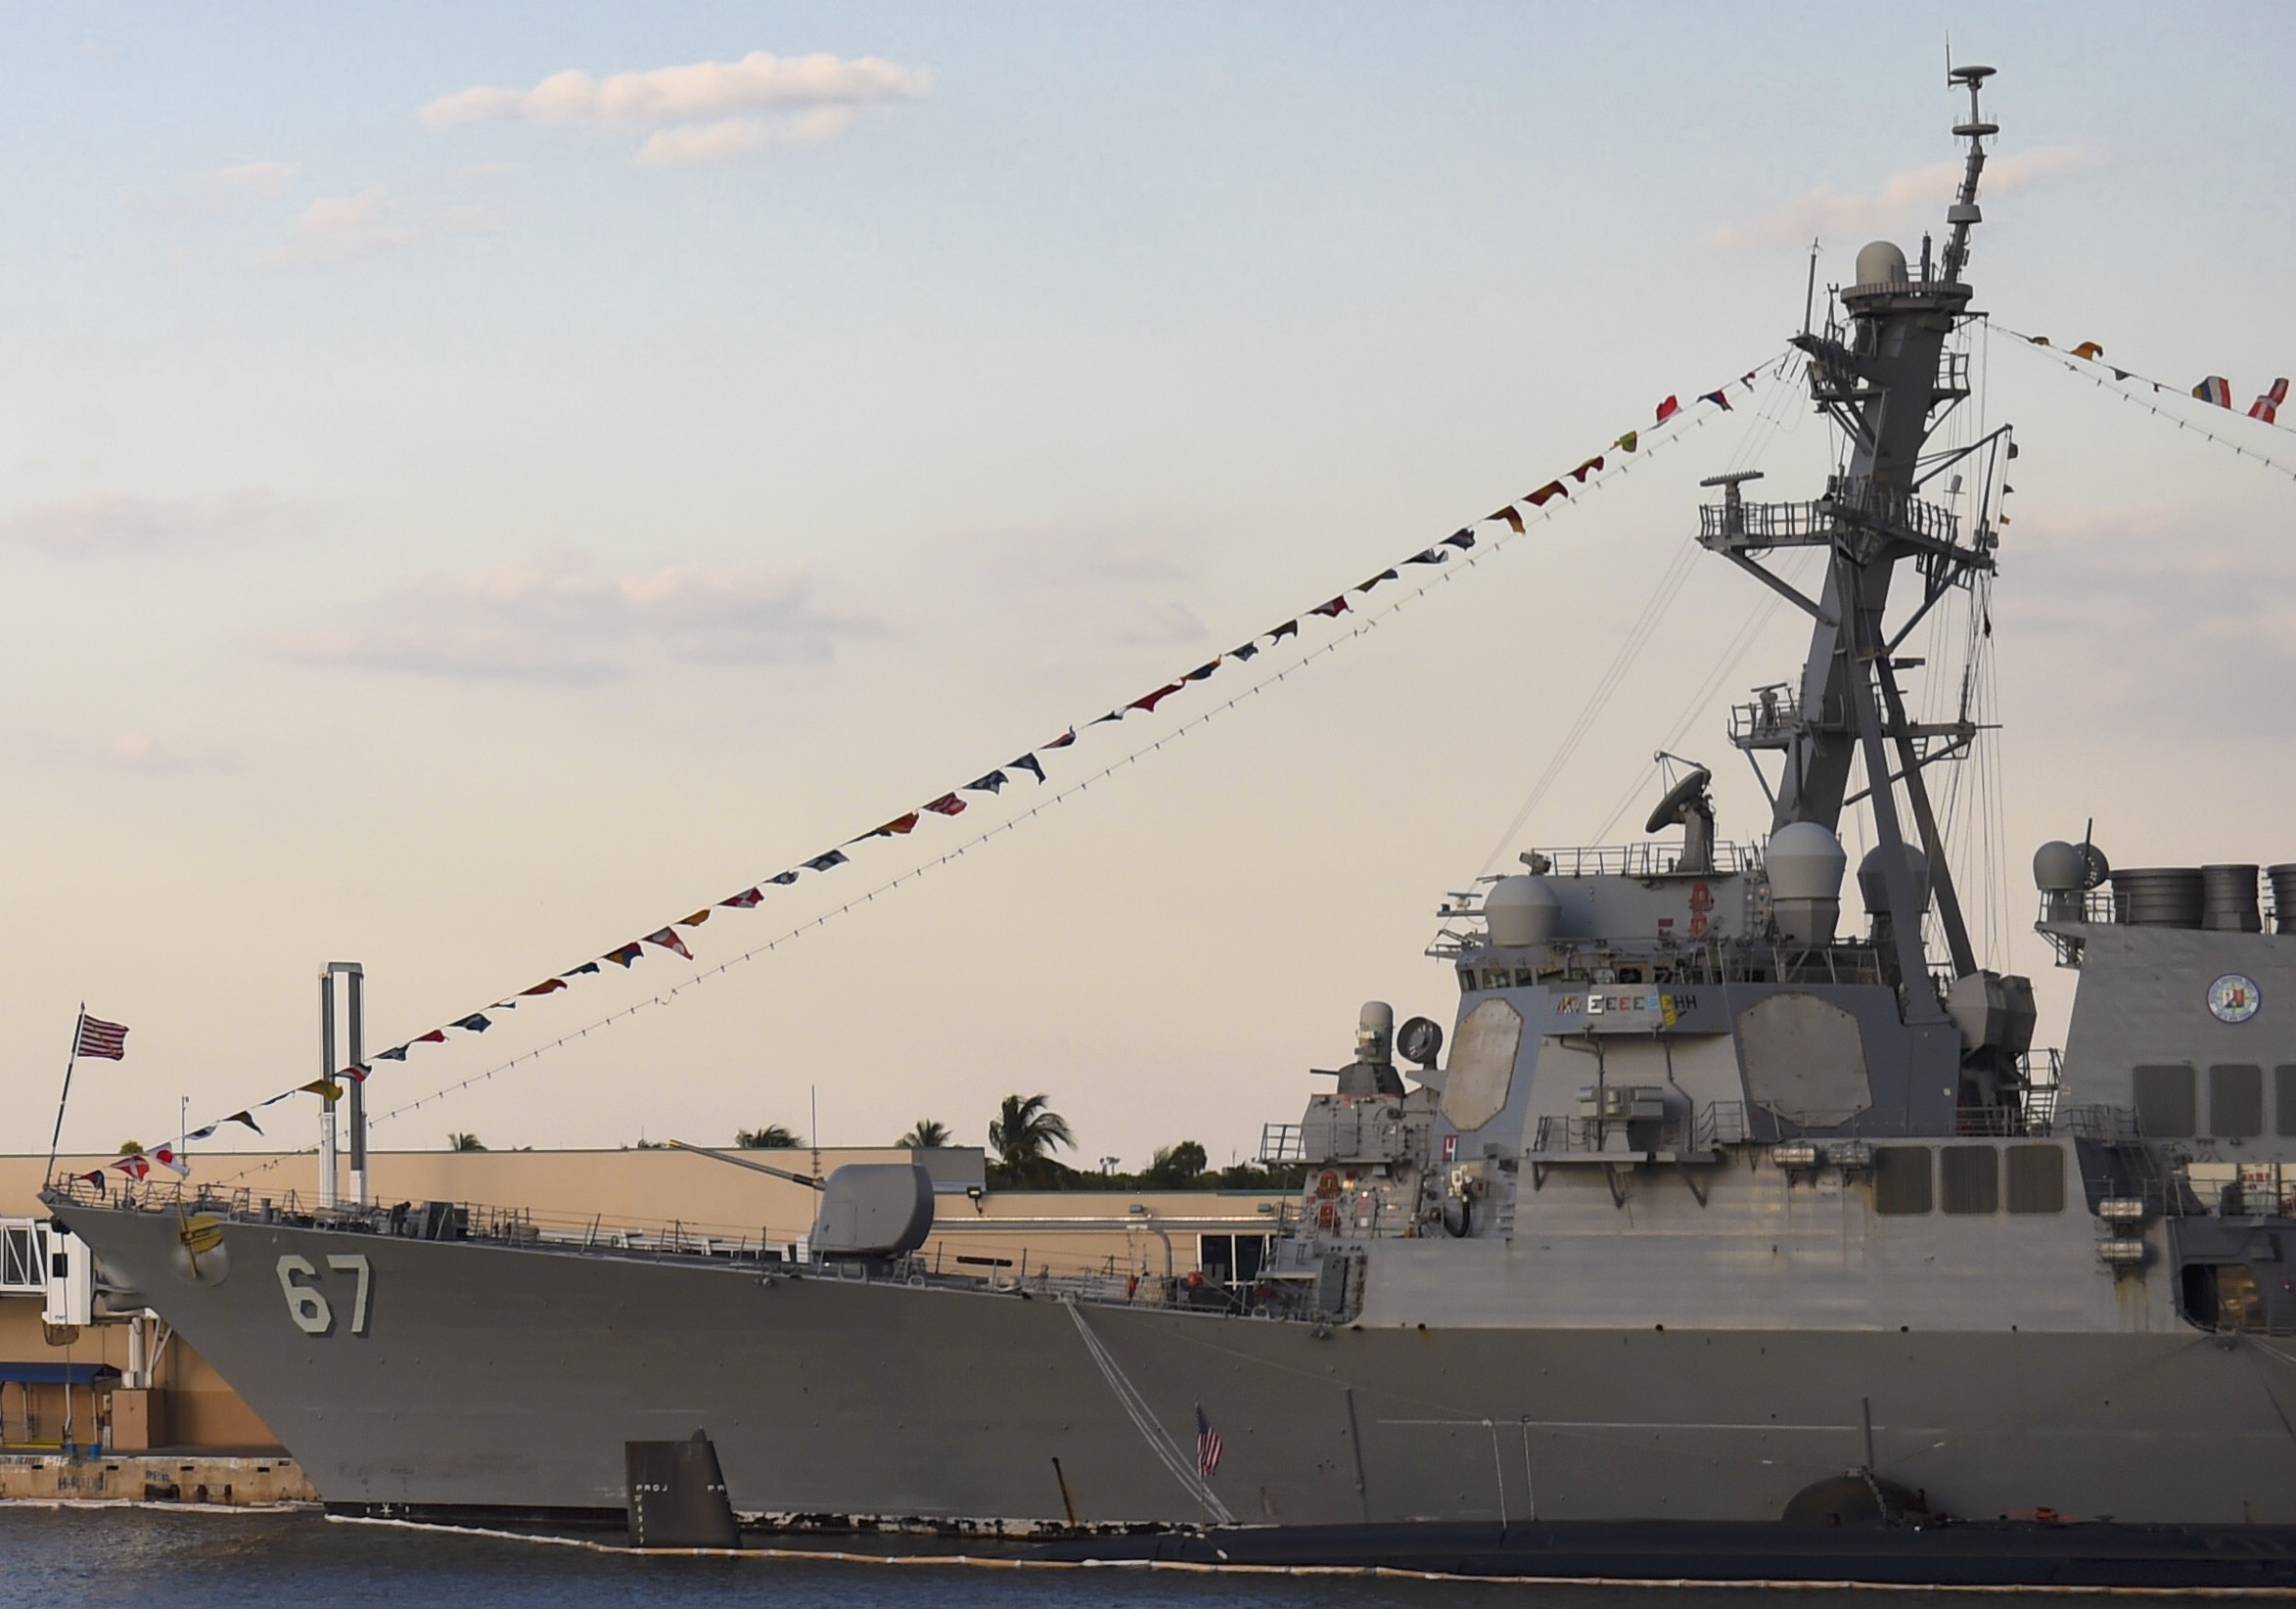 ddg-67 uss cole guided missile destroyer arleigh burke class navy aegis 08 port everglades florida